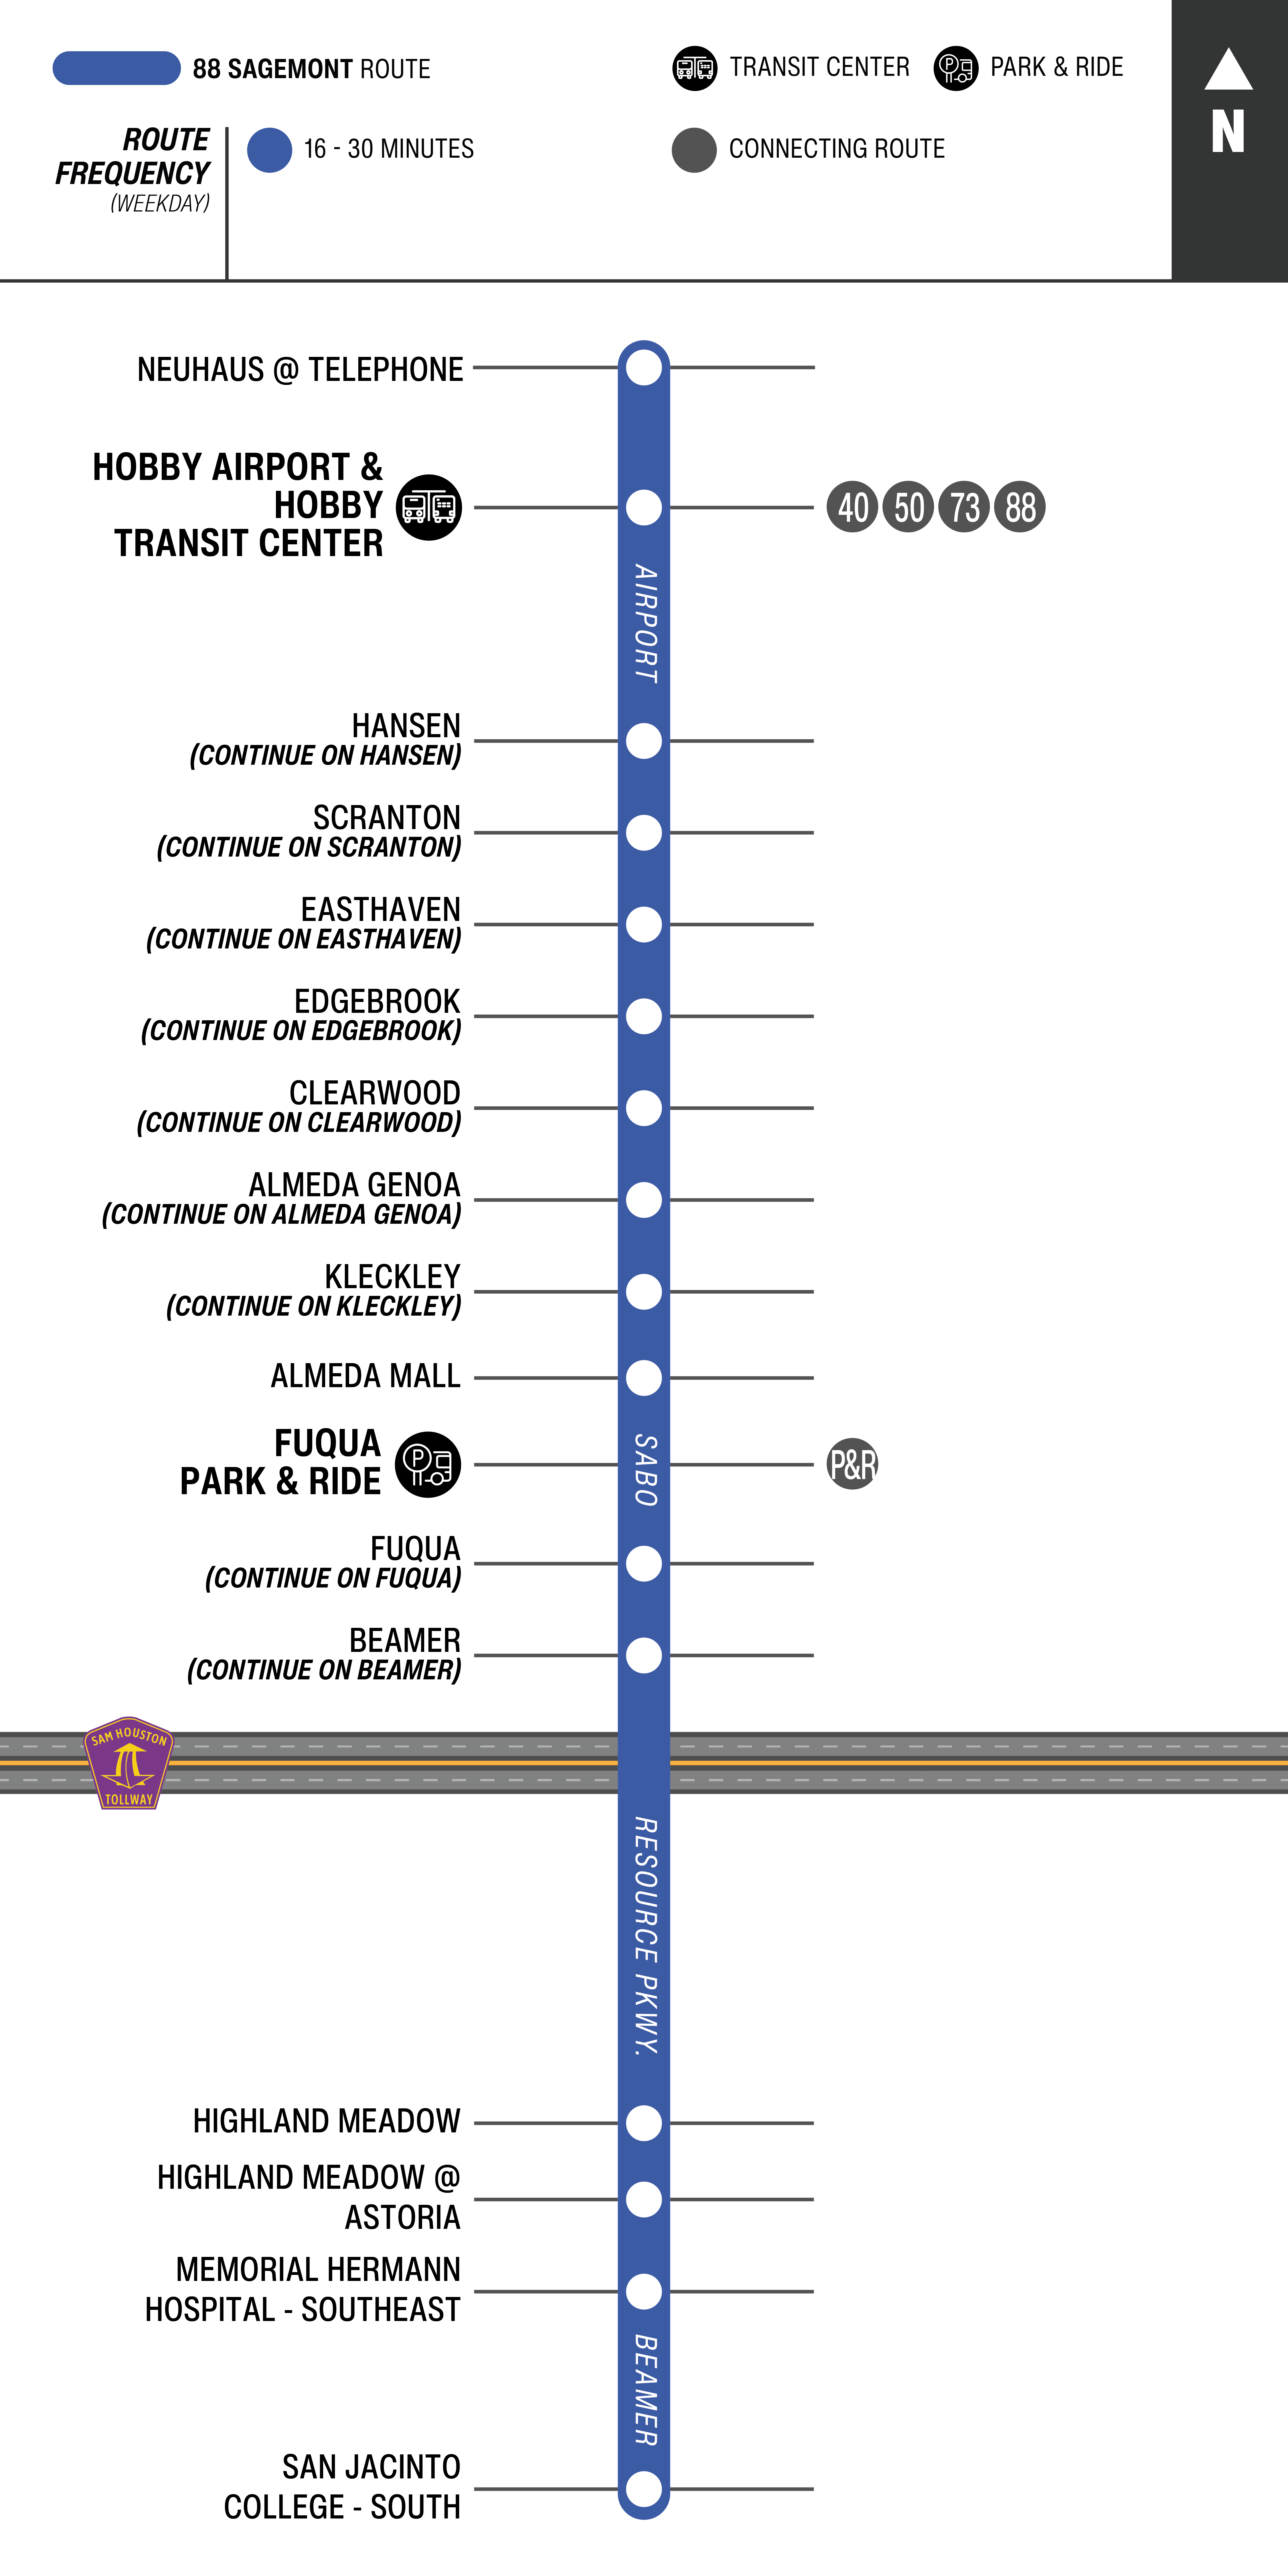 Route map for 88 Sagemont bus